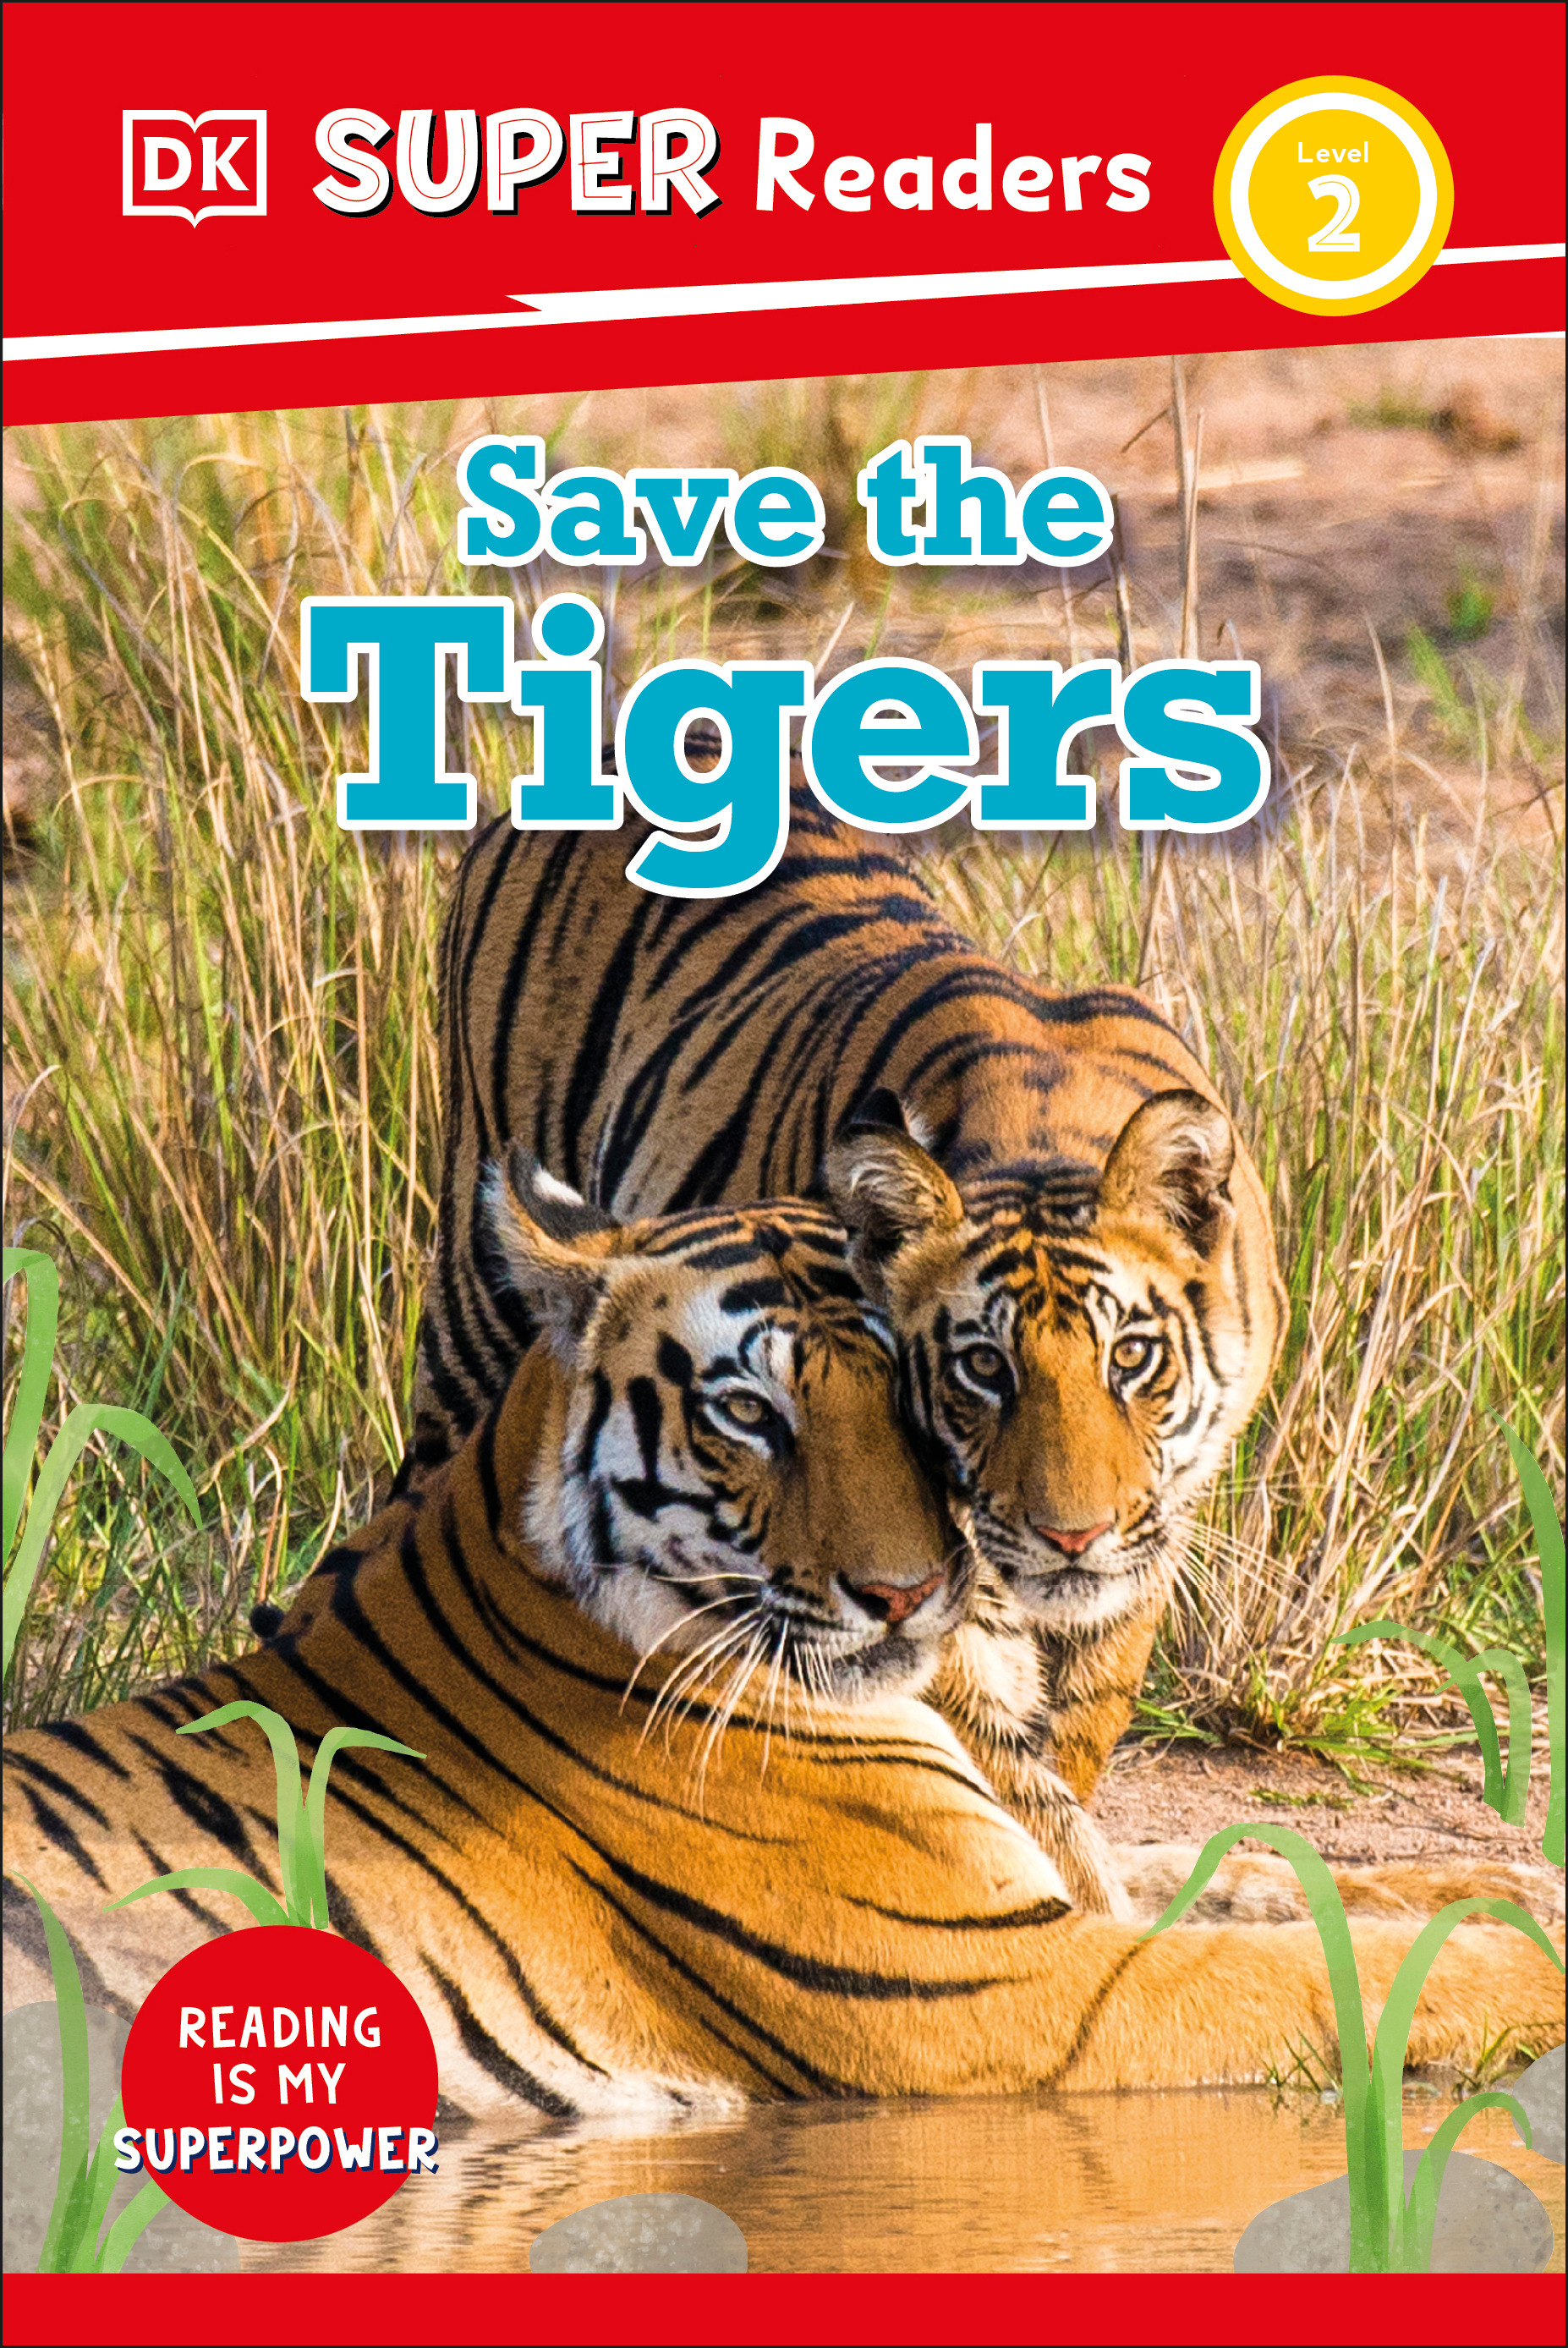 DK Super Readers Level 2 Save the Tigers | 